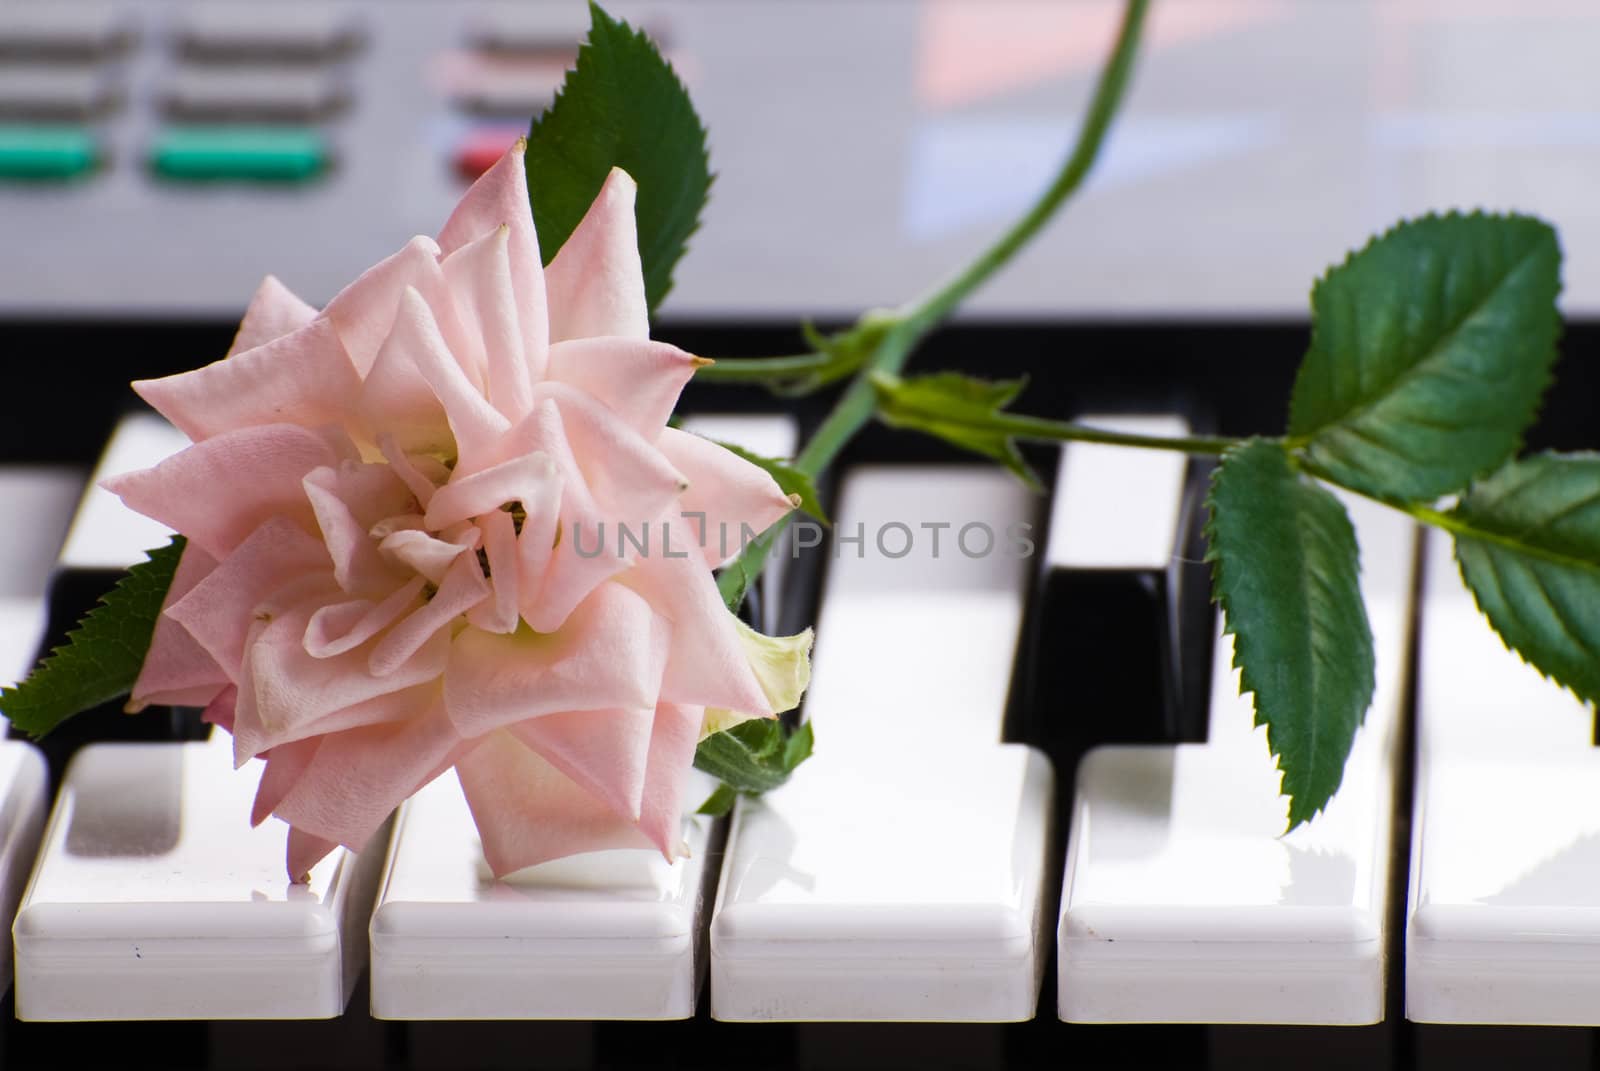 Closeup view of an open rose lying on the keys of an electronic keyboard